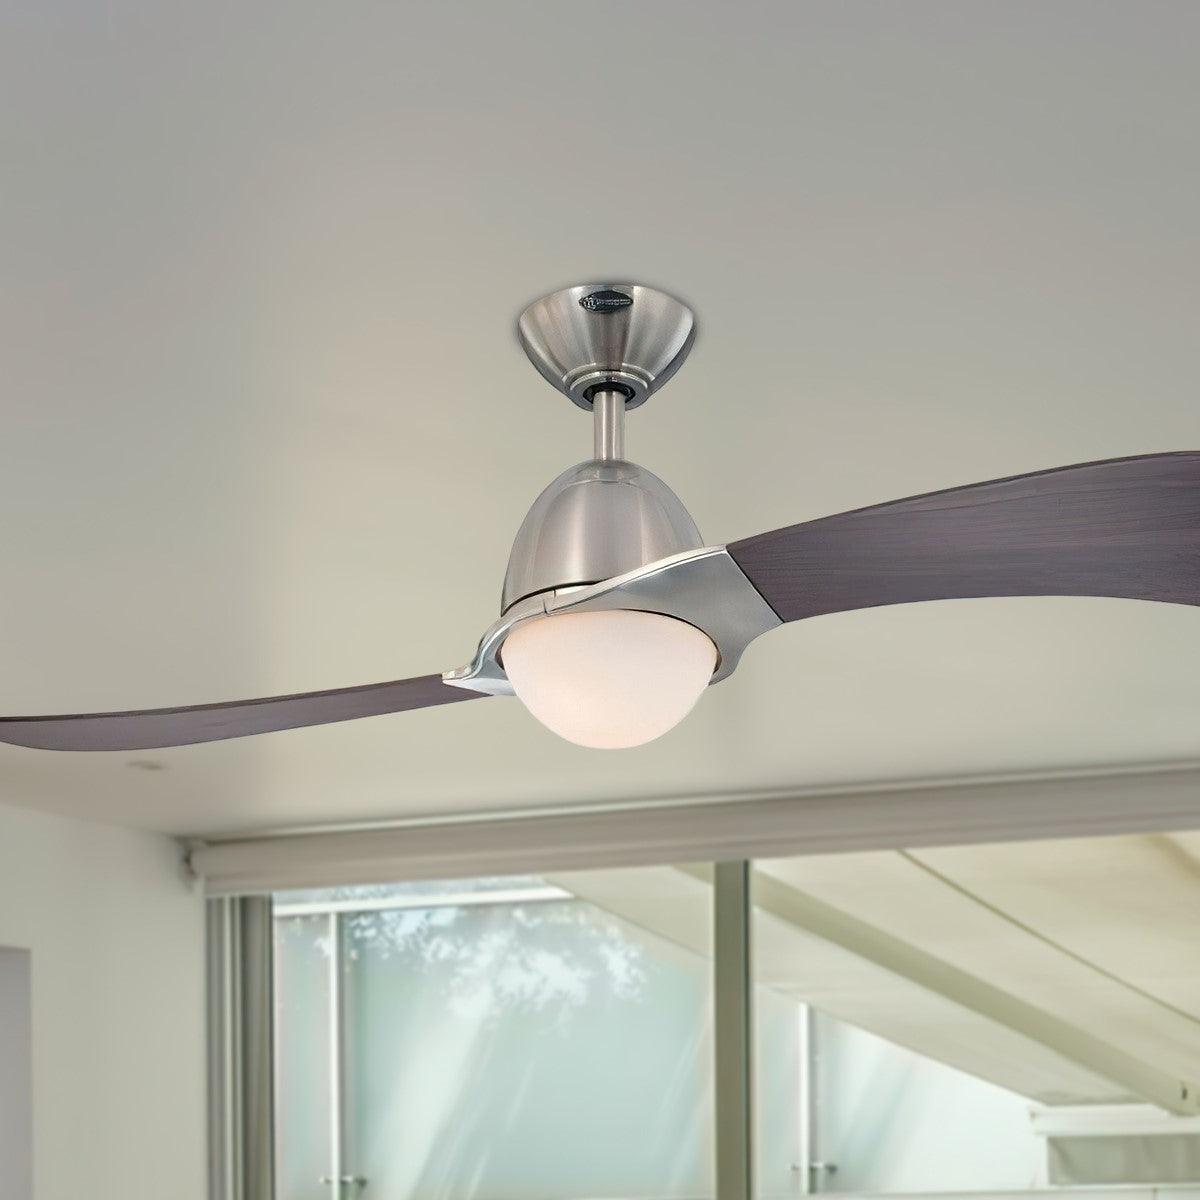 Solana 48 Inch 2 Blades Propeller Ceiling Fan With Light And Remote, Brushed Nickel Finish - Bees Lighting